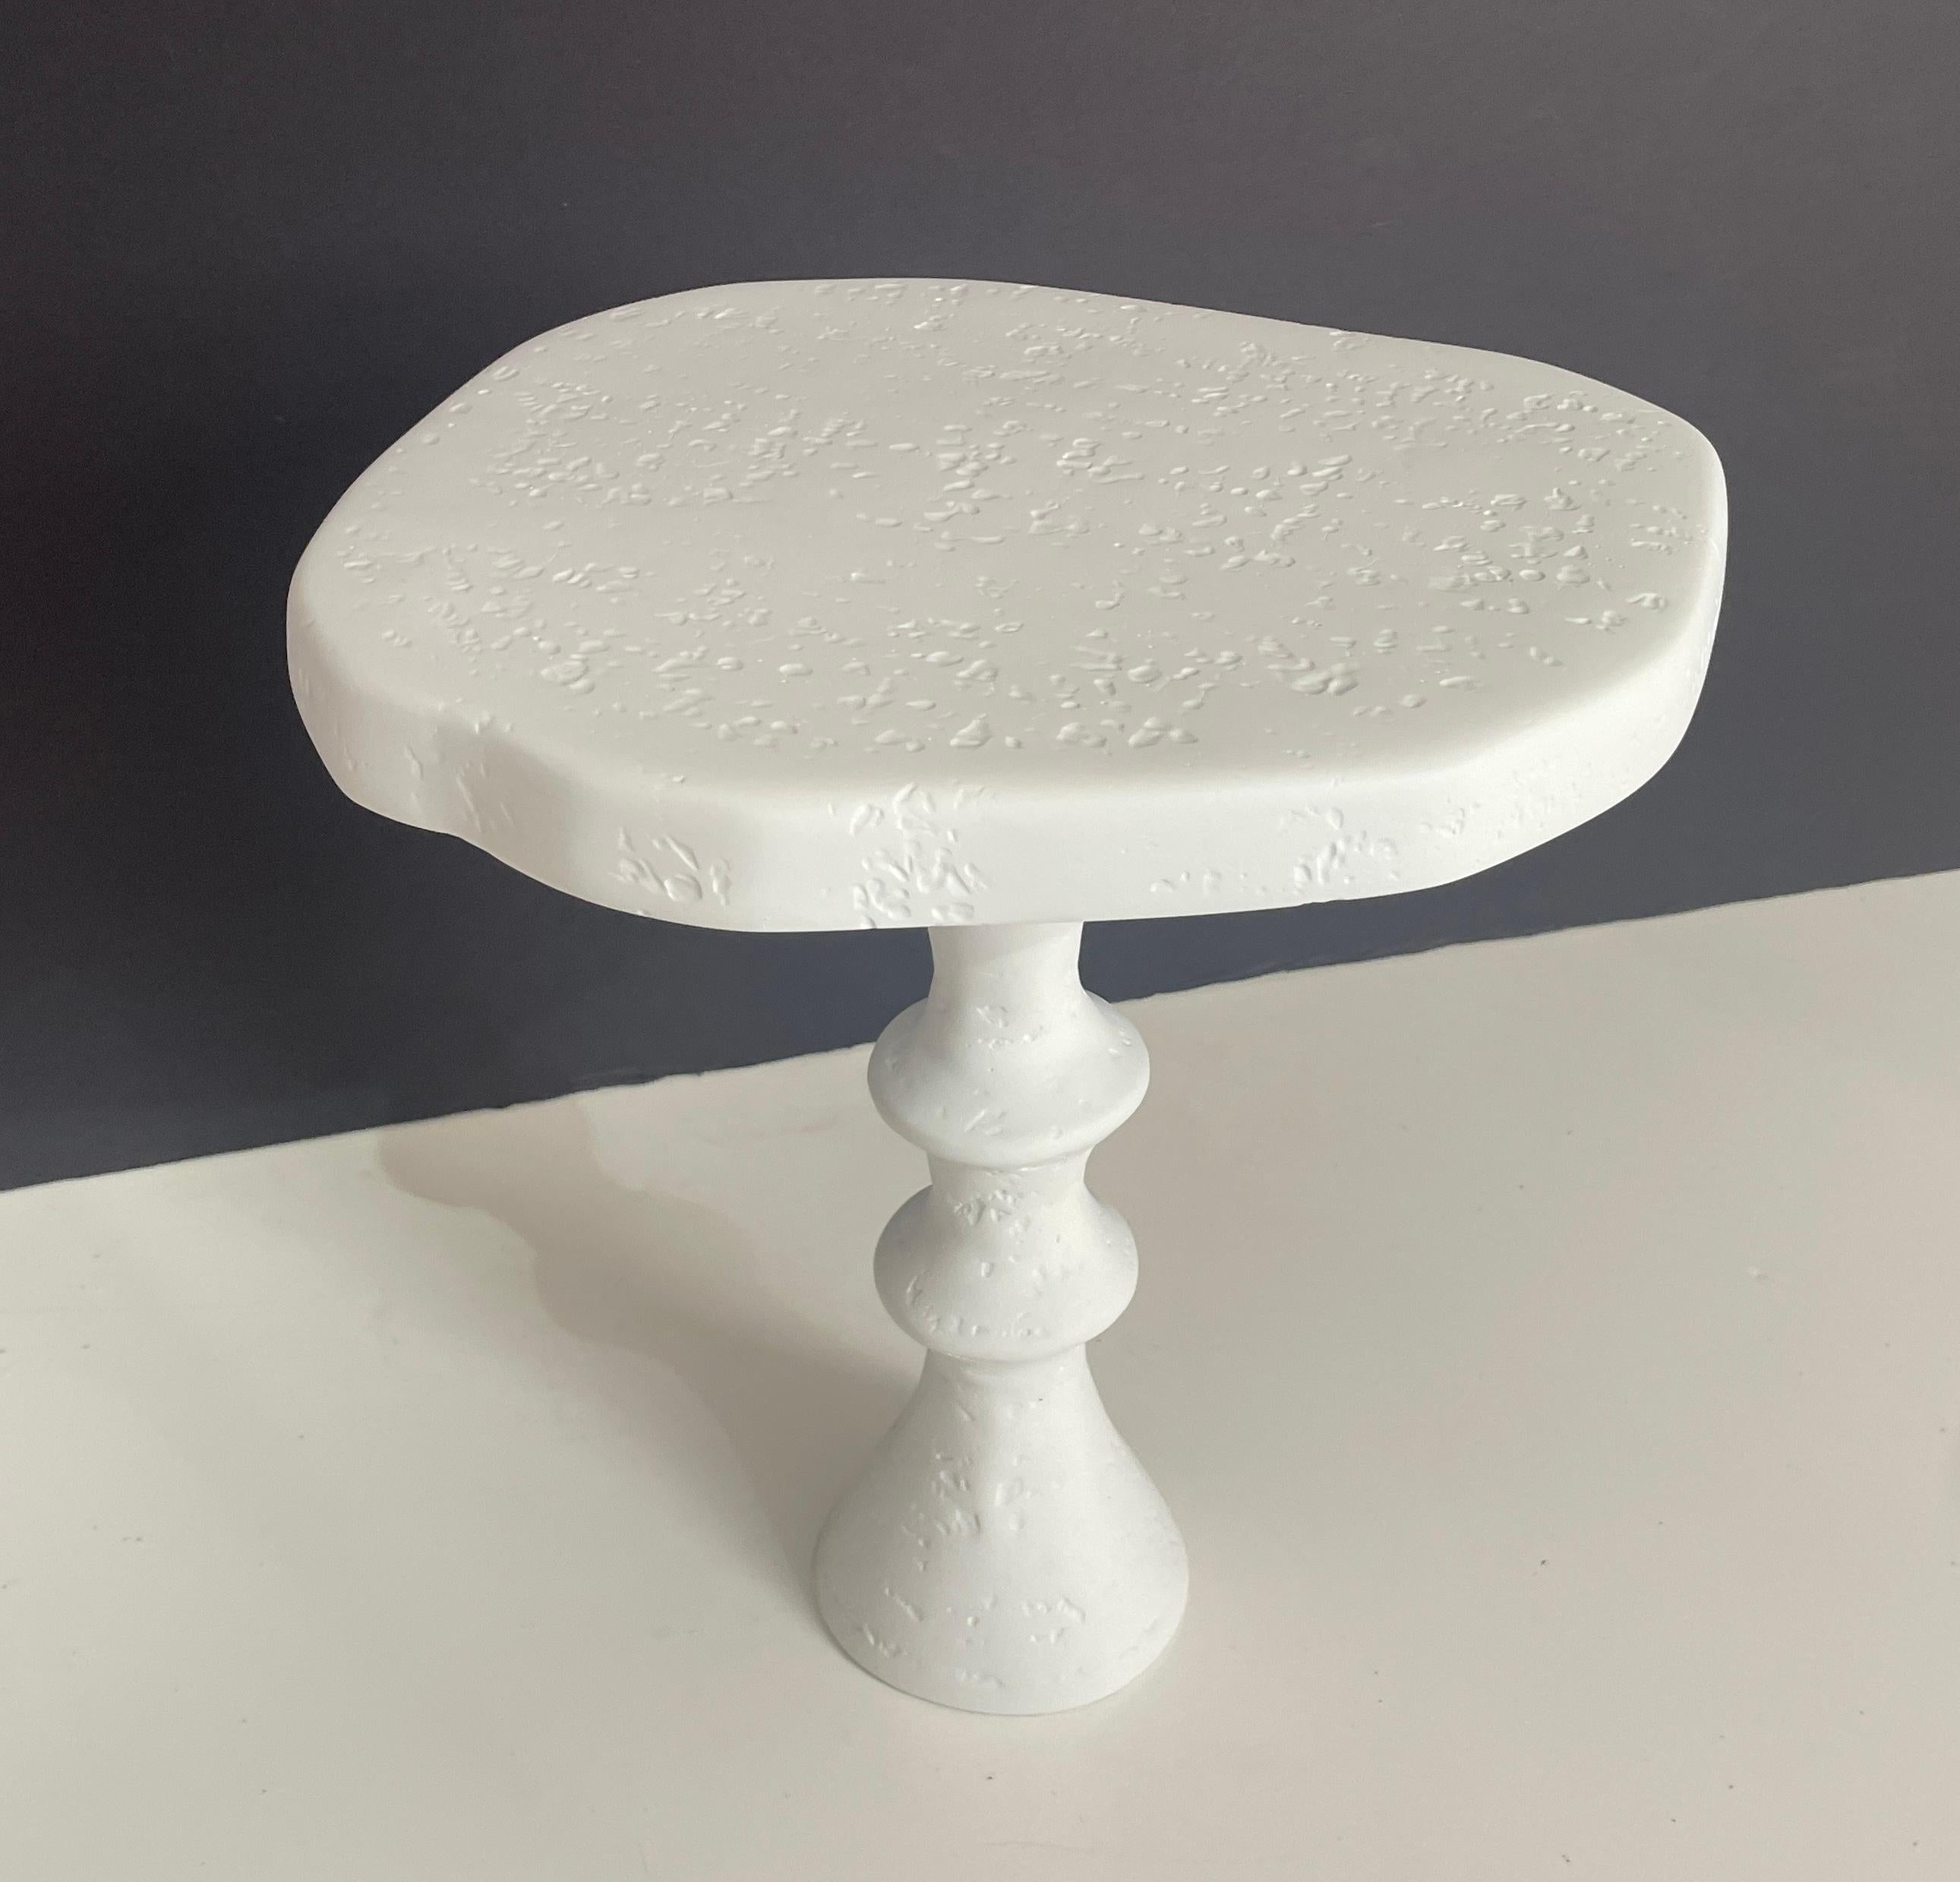 Organic in shape, this plaster side table with its pedestal base is a unique piece and very versatile. This smelled scale side table works well in both traditional and modern interiors. The handcrafted plaster is beautiful in its natural white